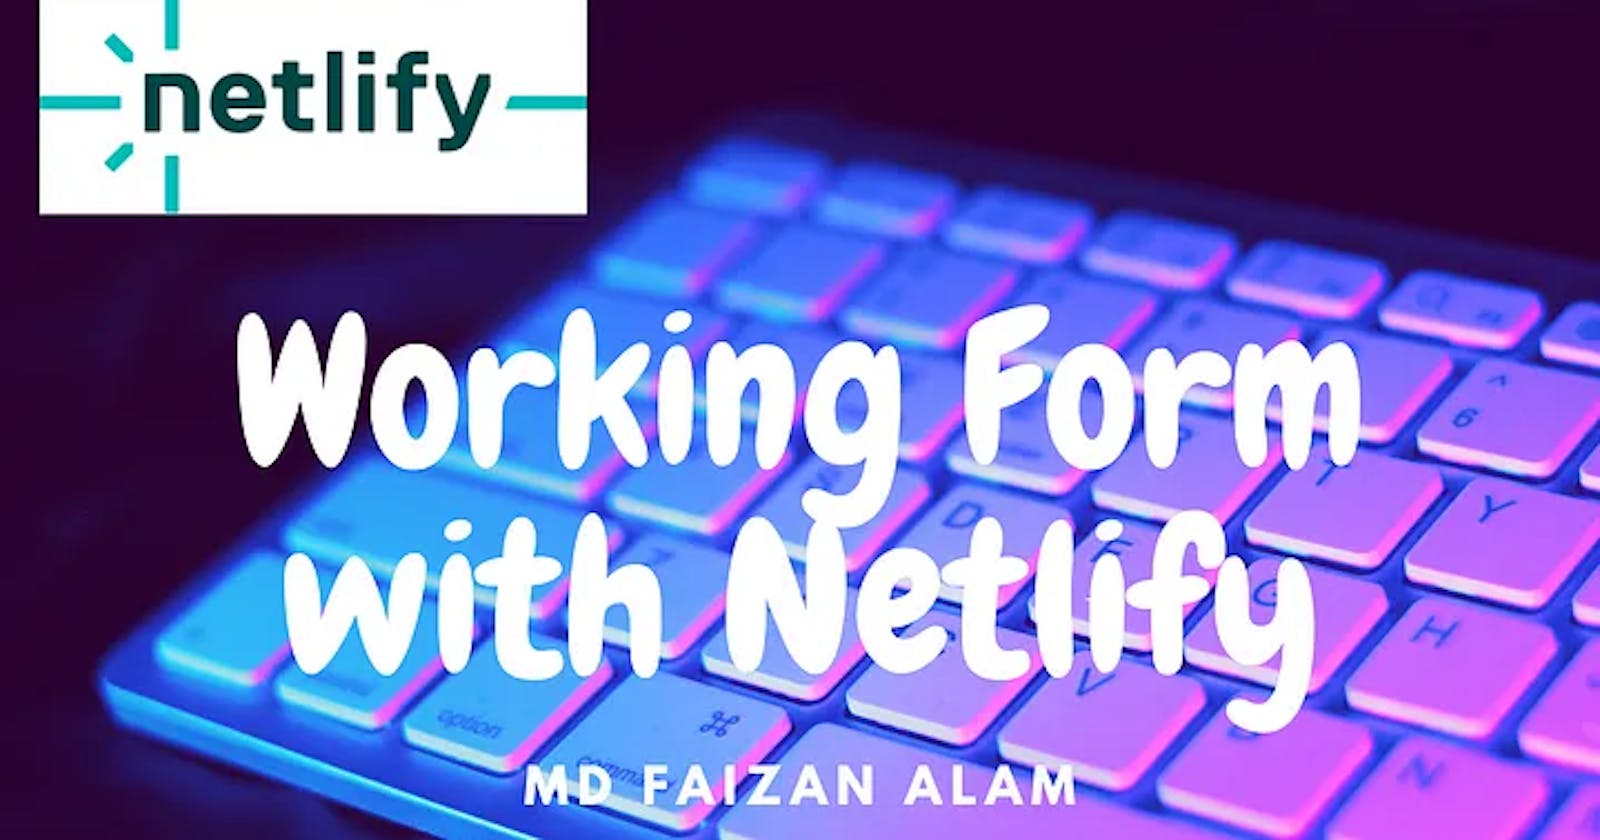 “Building a Working Form for Your Website on Netlify: A Step-by-Step Guide for Beginners”